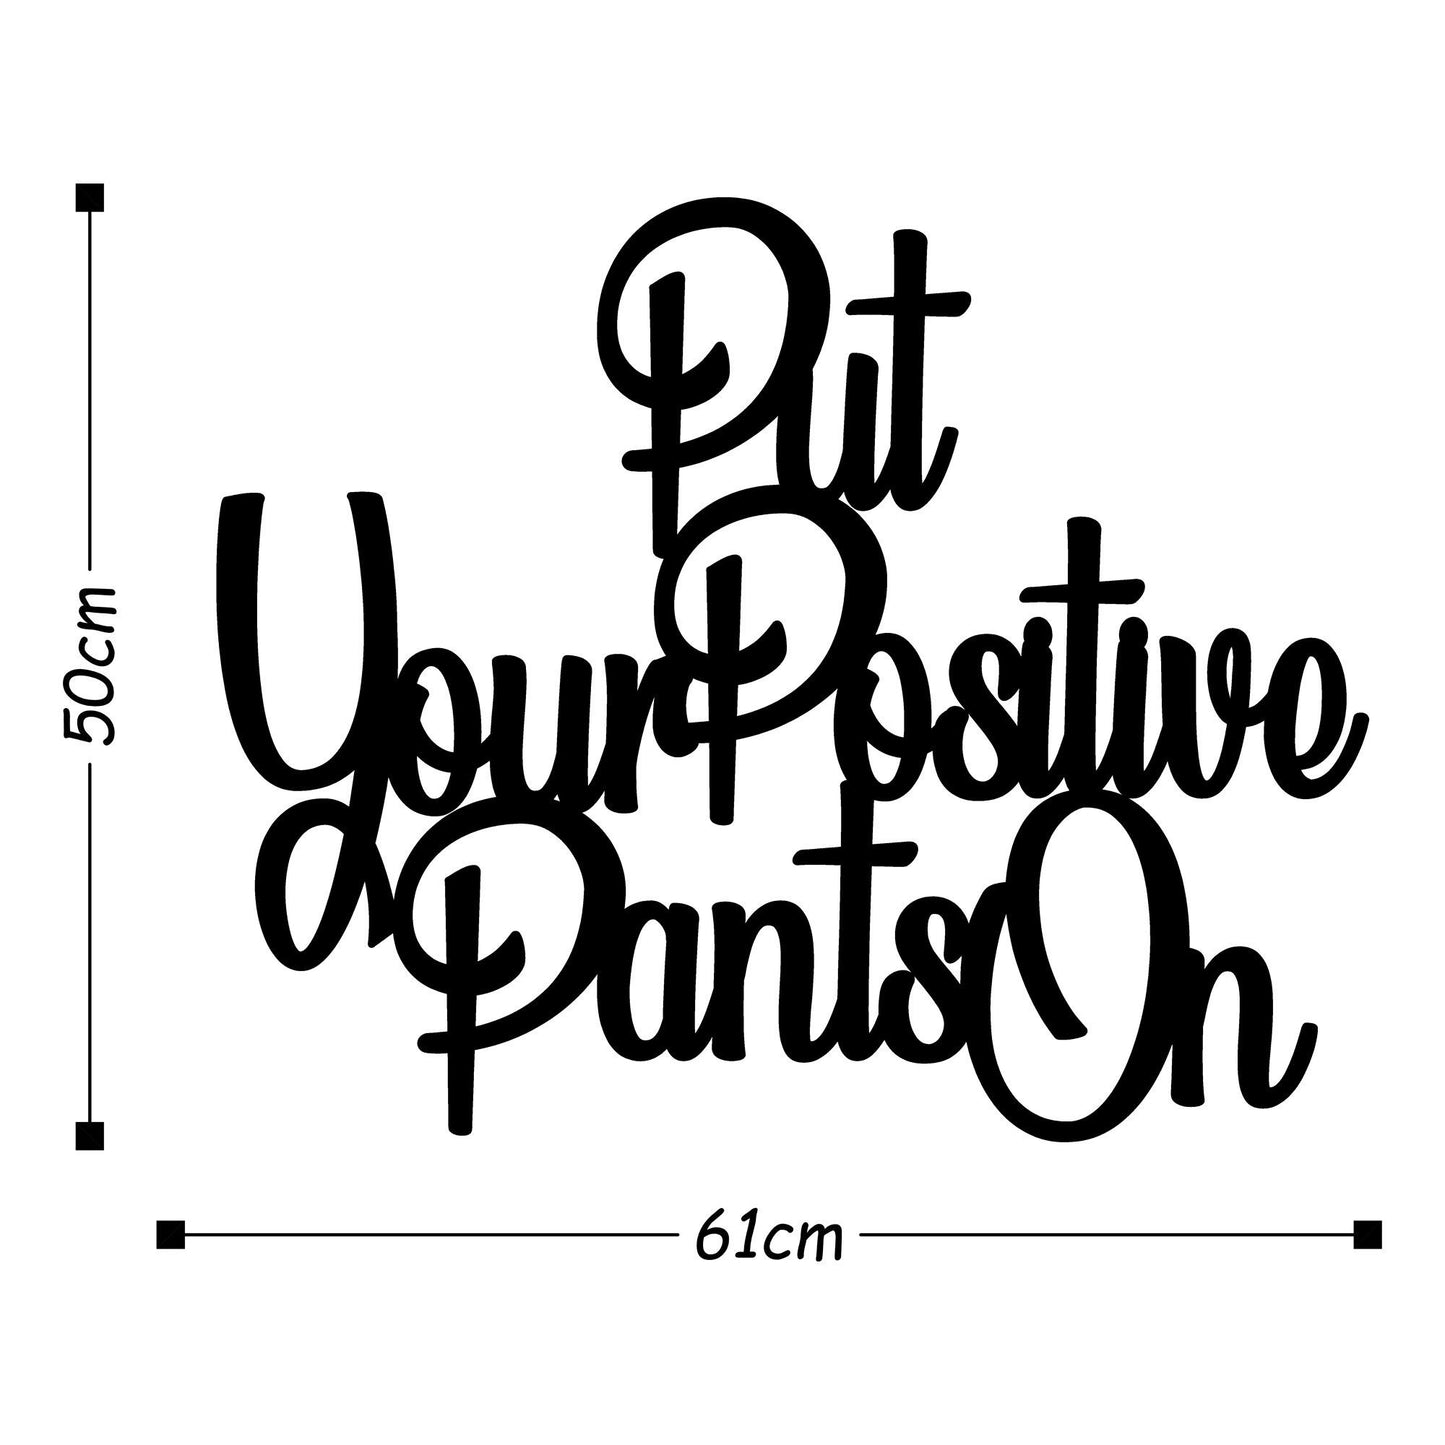 Put Your Positive Pants On - Decorative Metal Wall Accessory